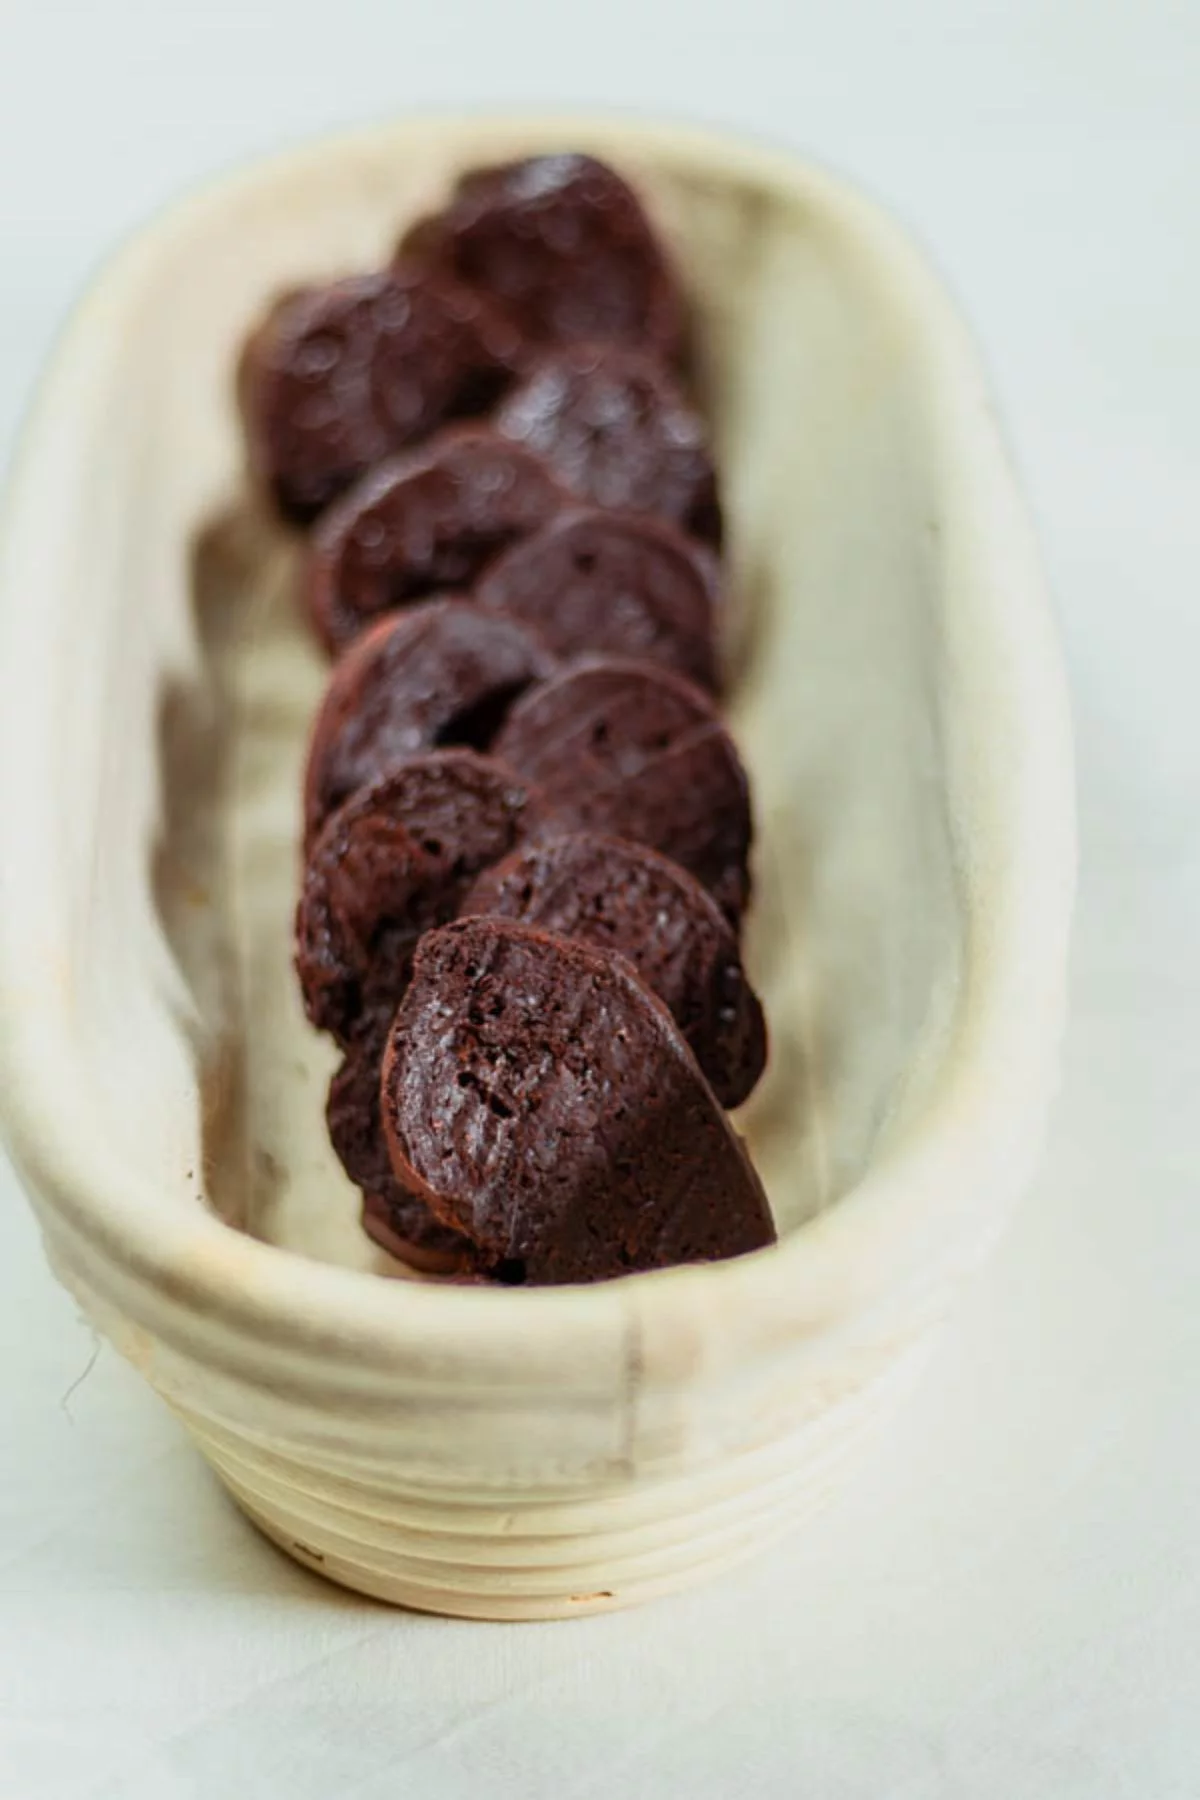 Only 3 Ingredients! Chocolate Rusks Recipe